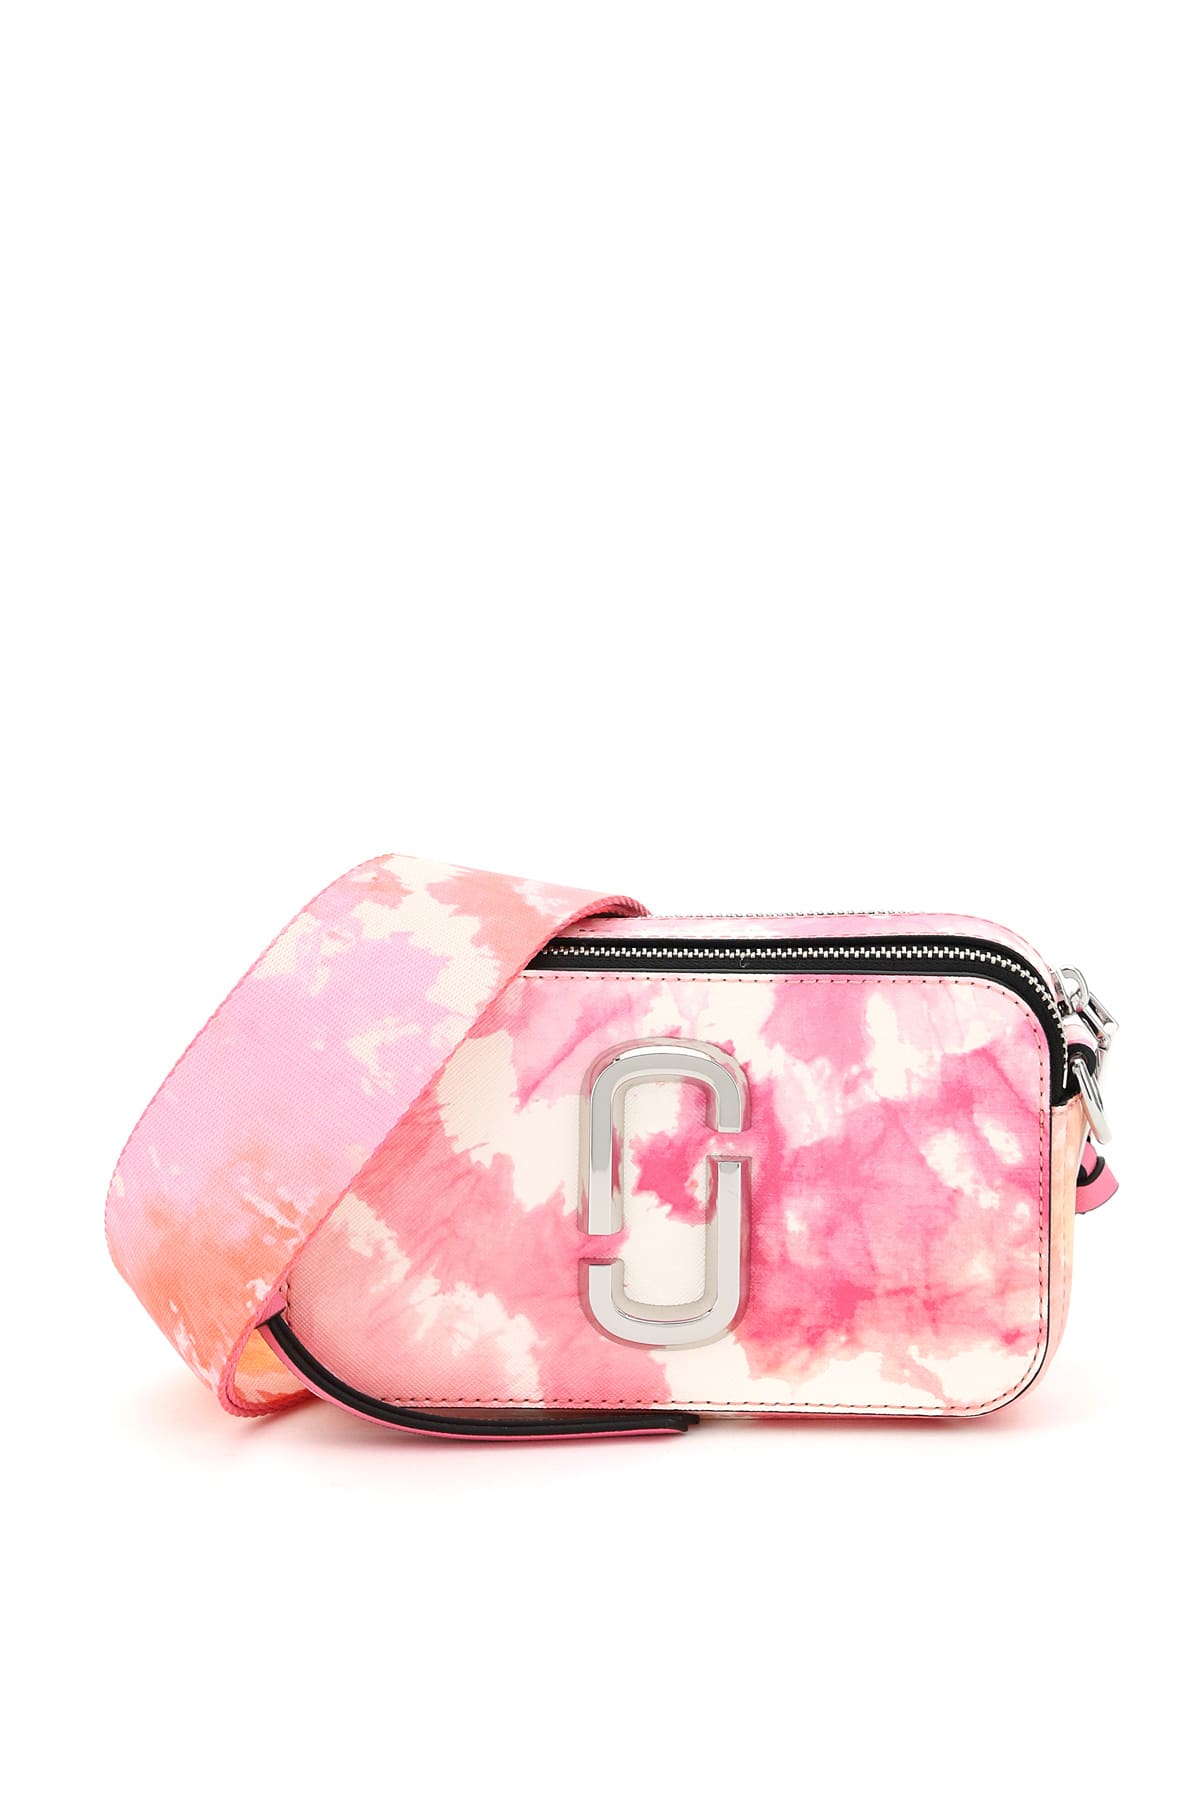 Marc Jacobs The Snapshot Small Tie-dye Camera Bag